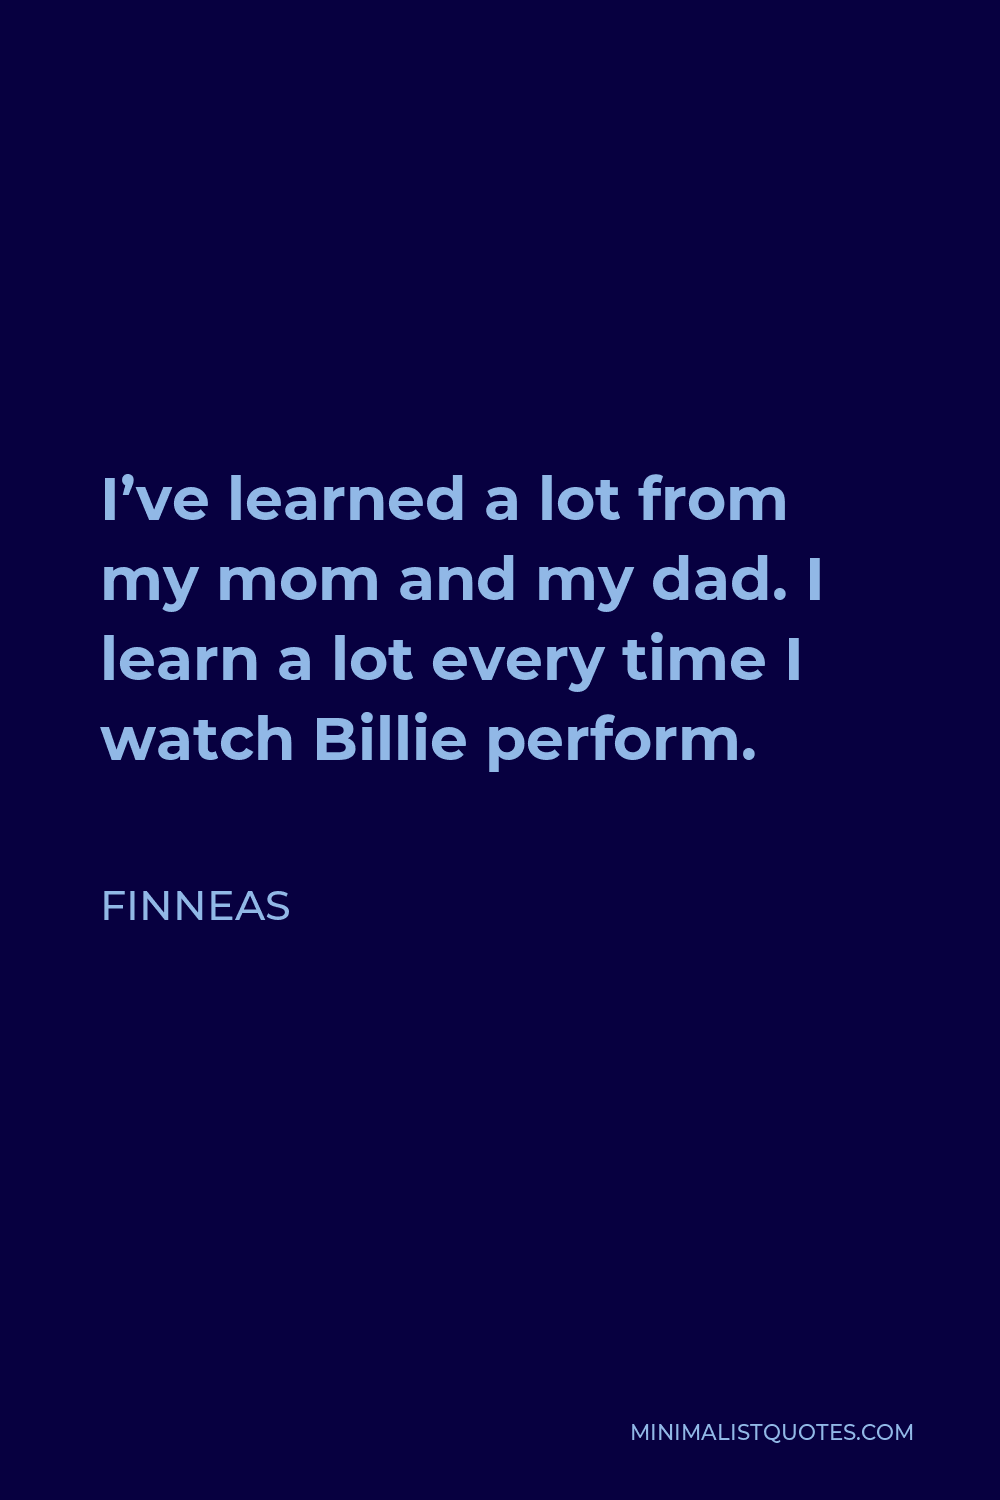 Finneas Quote - I’ve learned a lot from my mom and my dad. I learn a lot every time I watch Billie perform.